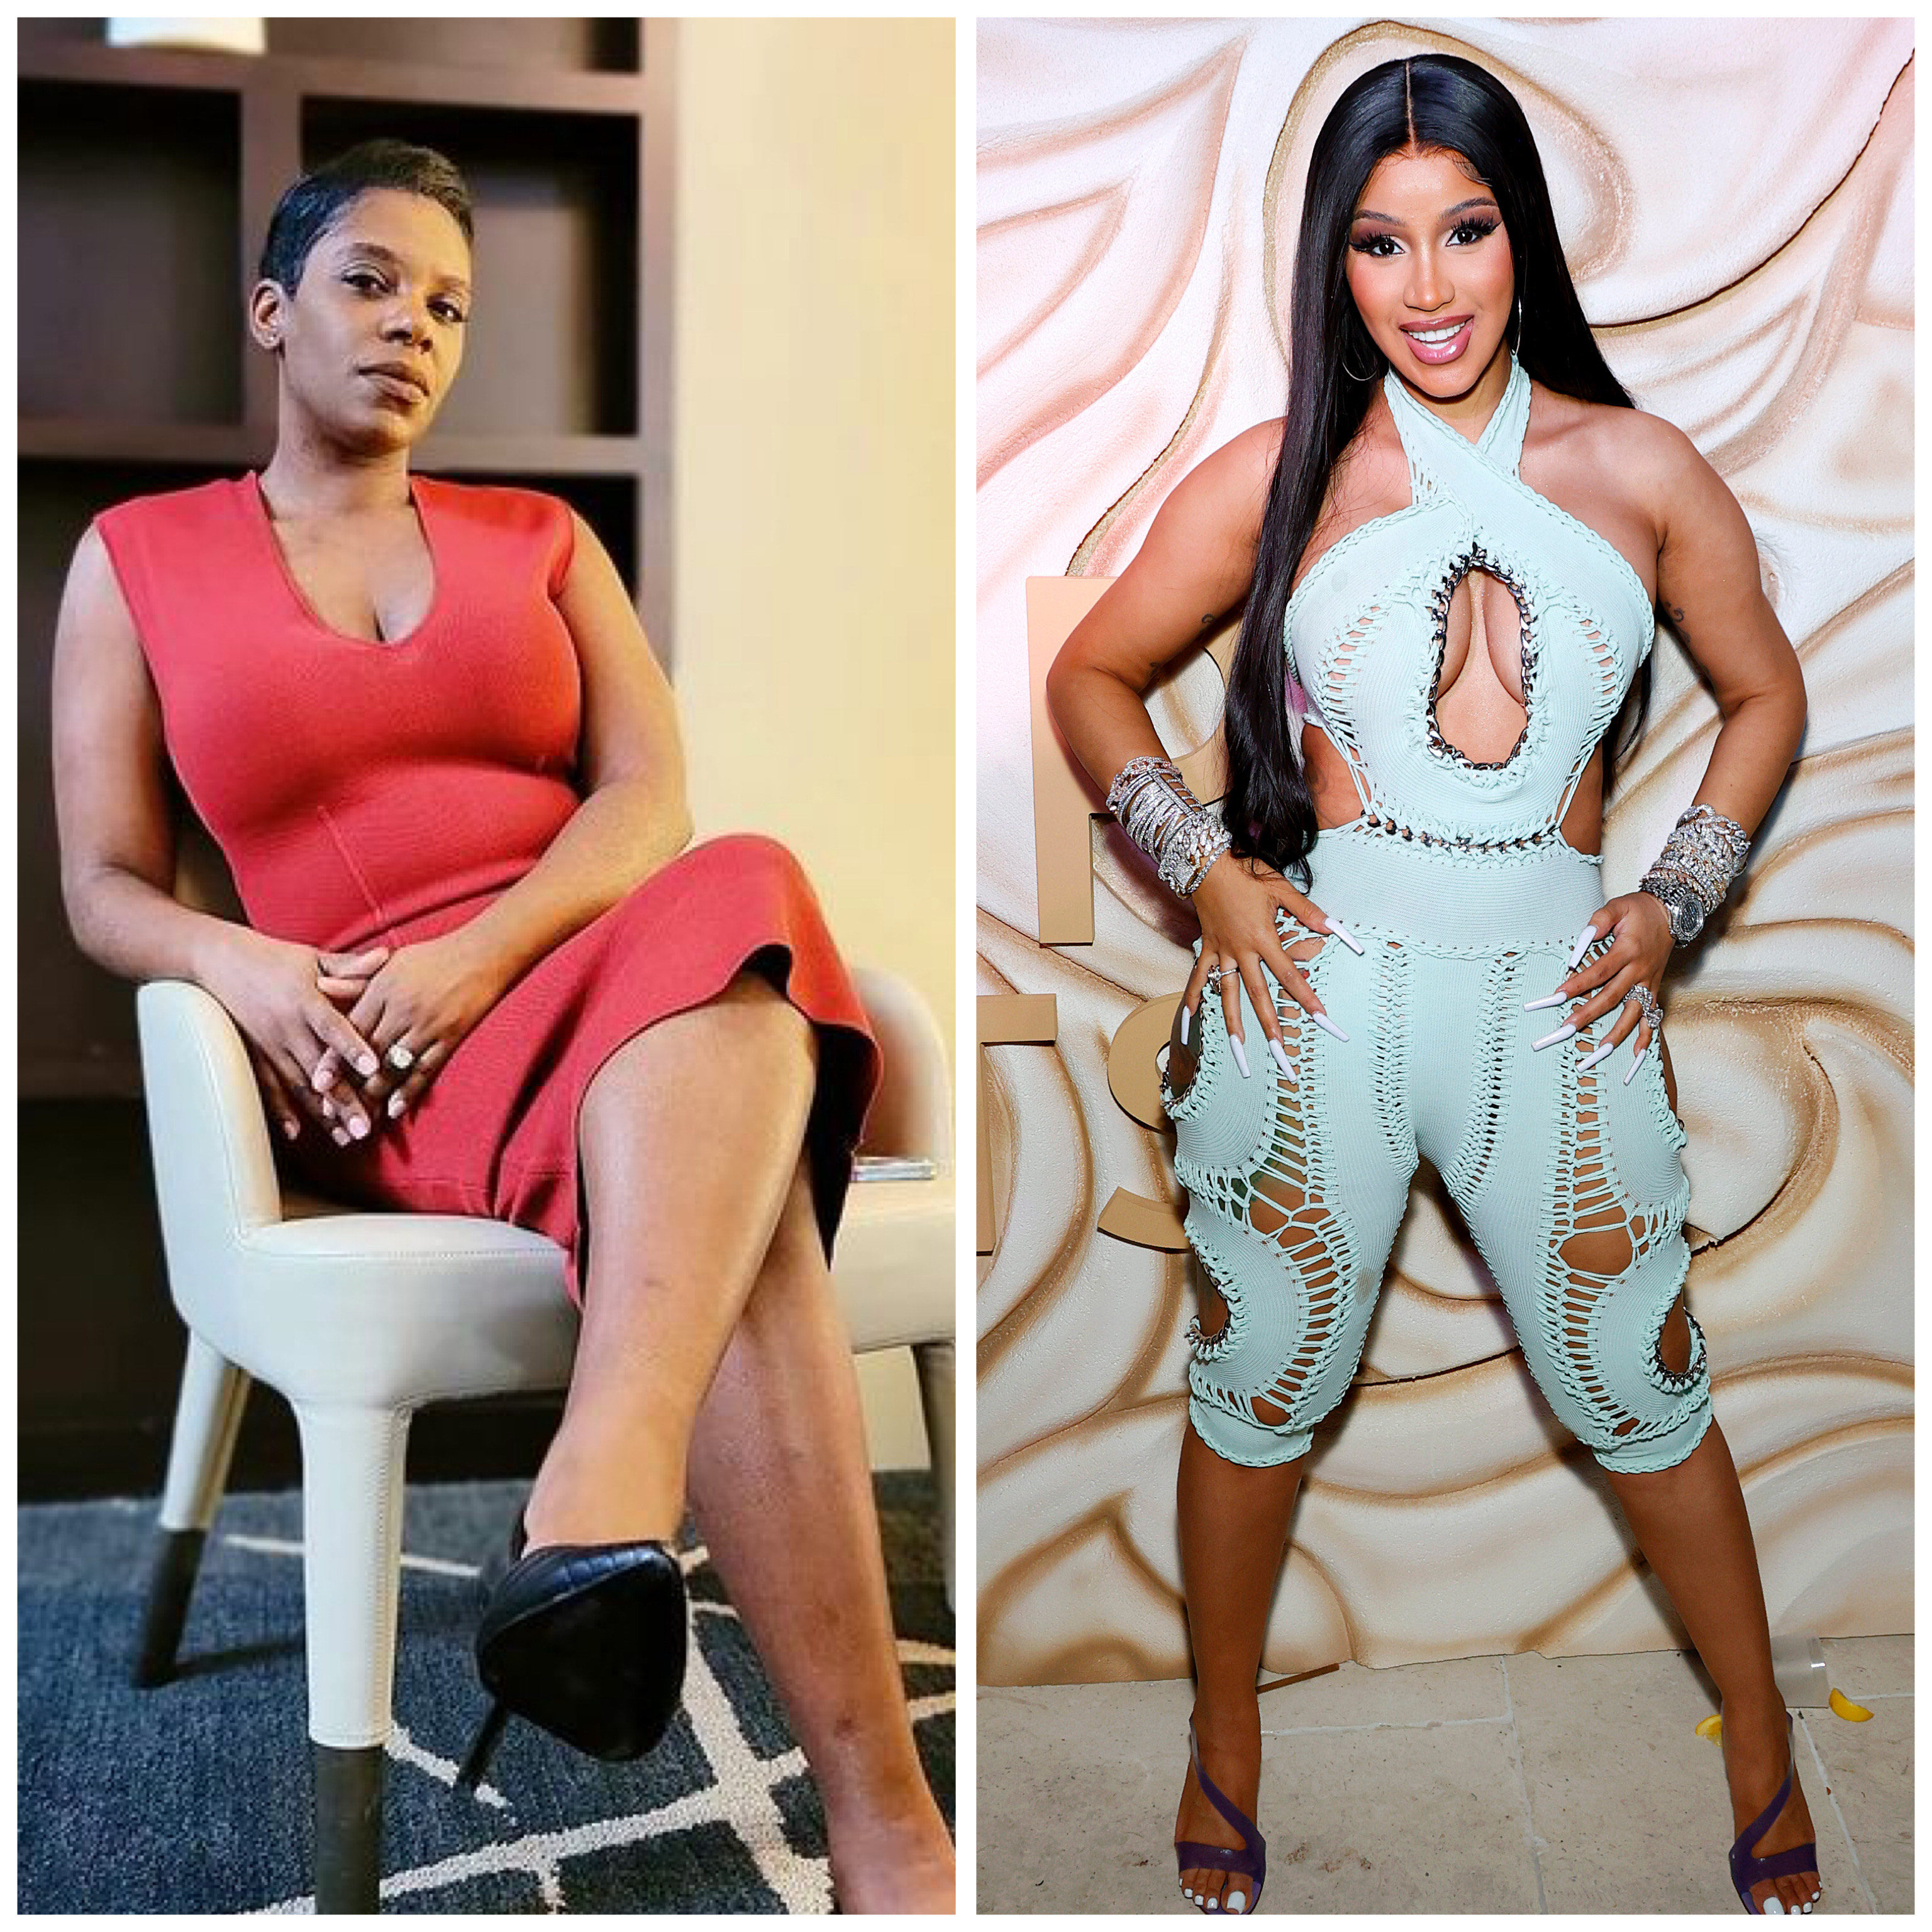 [VIDEO] husband!When asked if she intends to pay Cardi B more than $ 3 million, as the judge ordered, Tasha K says she “hasn’t got it.”